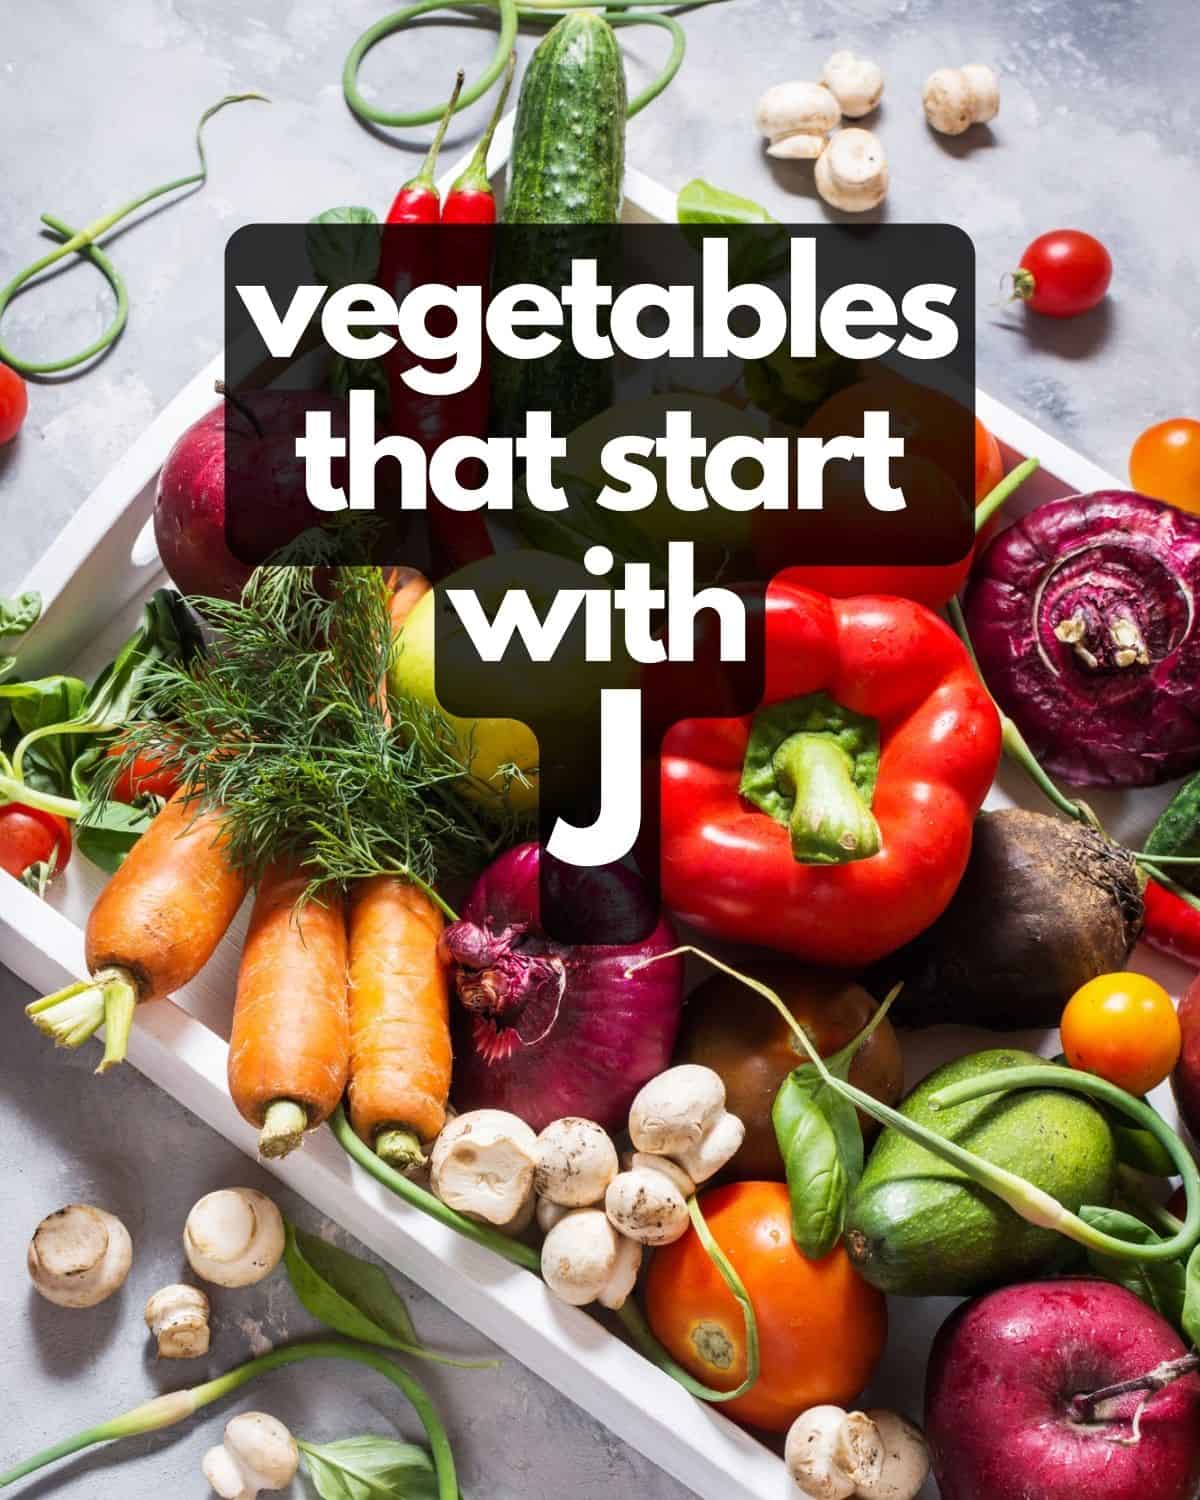 Table of vegetables, plus text: Vegetables that start with J.